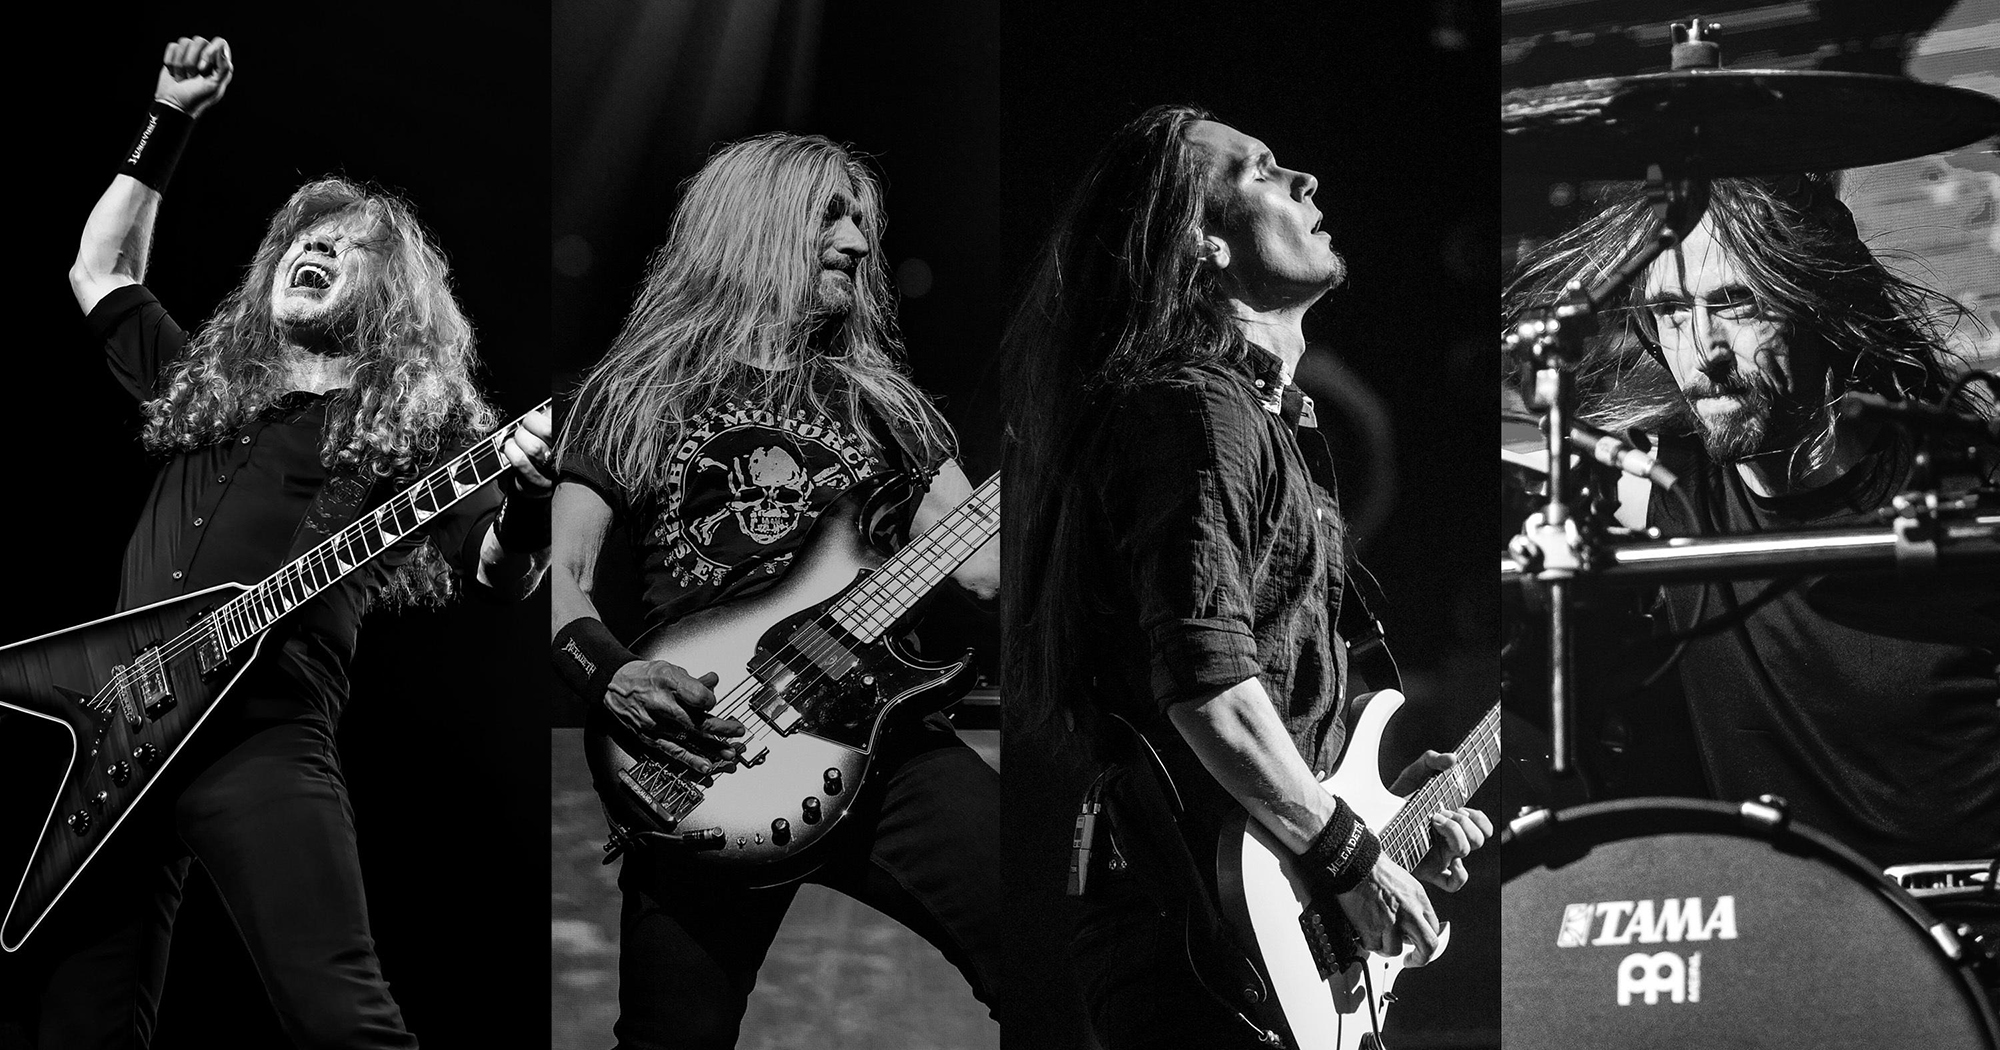 Megadeth Announces “Destroy All Enemies” Tour with Mudvayne and All That Remains